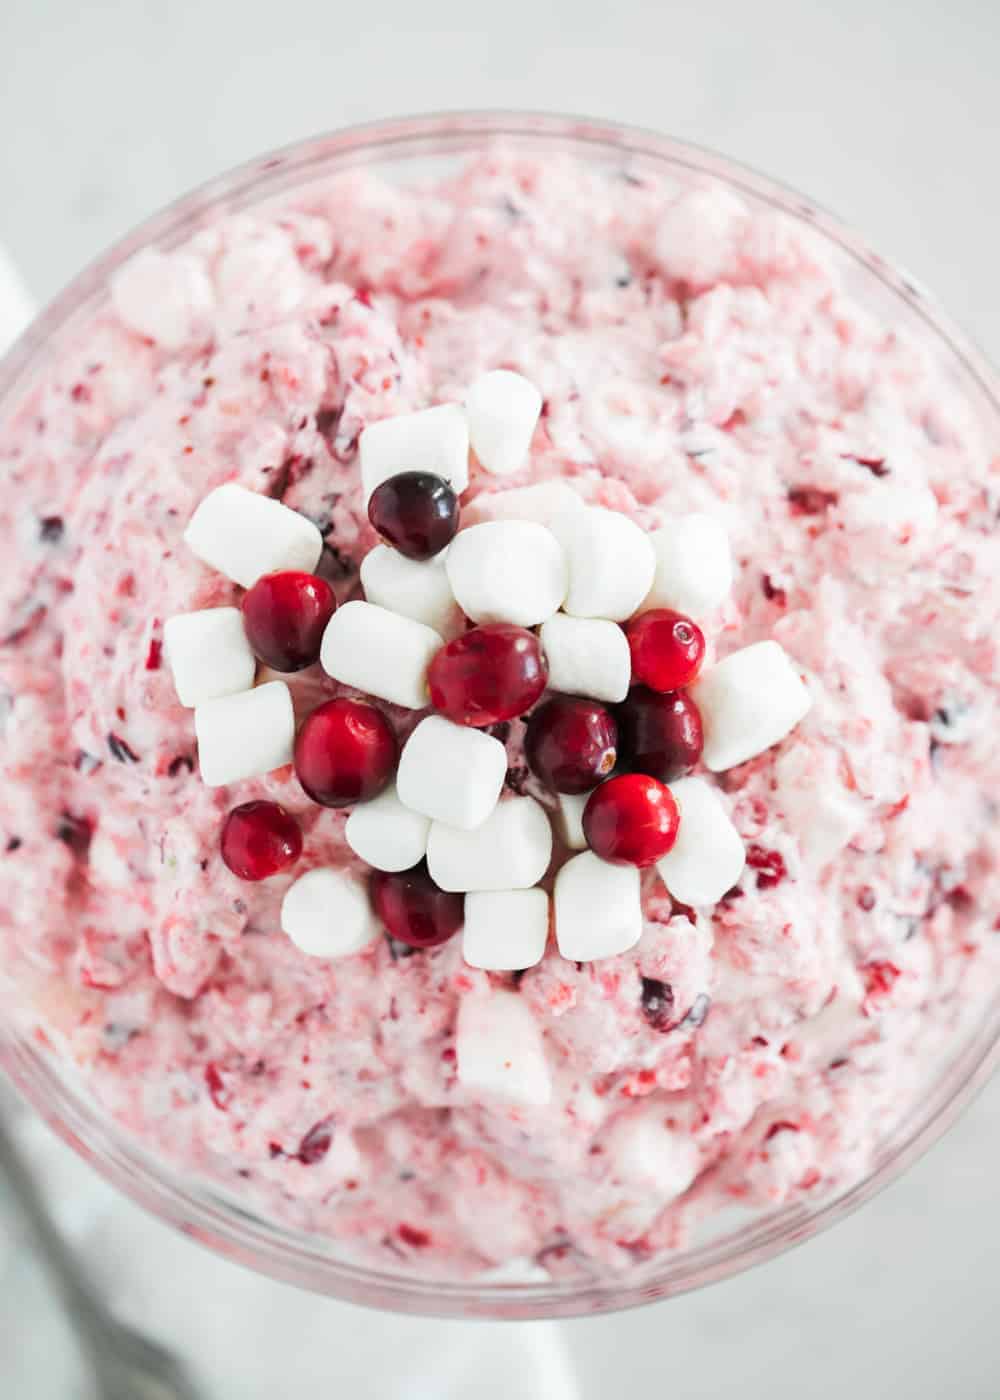 Cranberry salad with marshmallows.